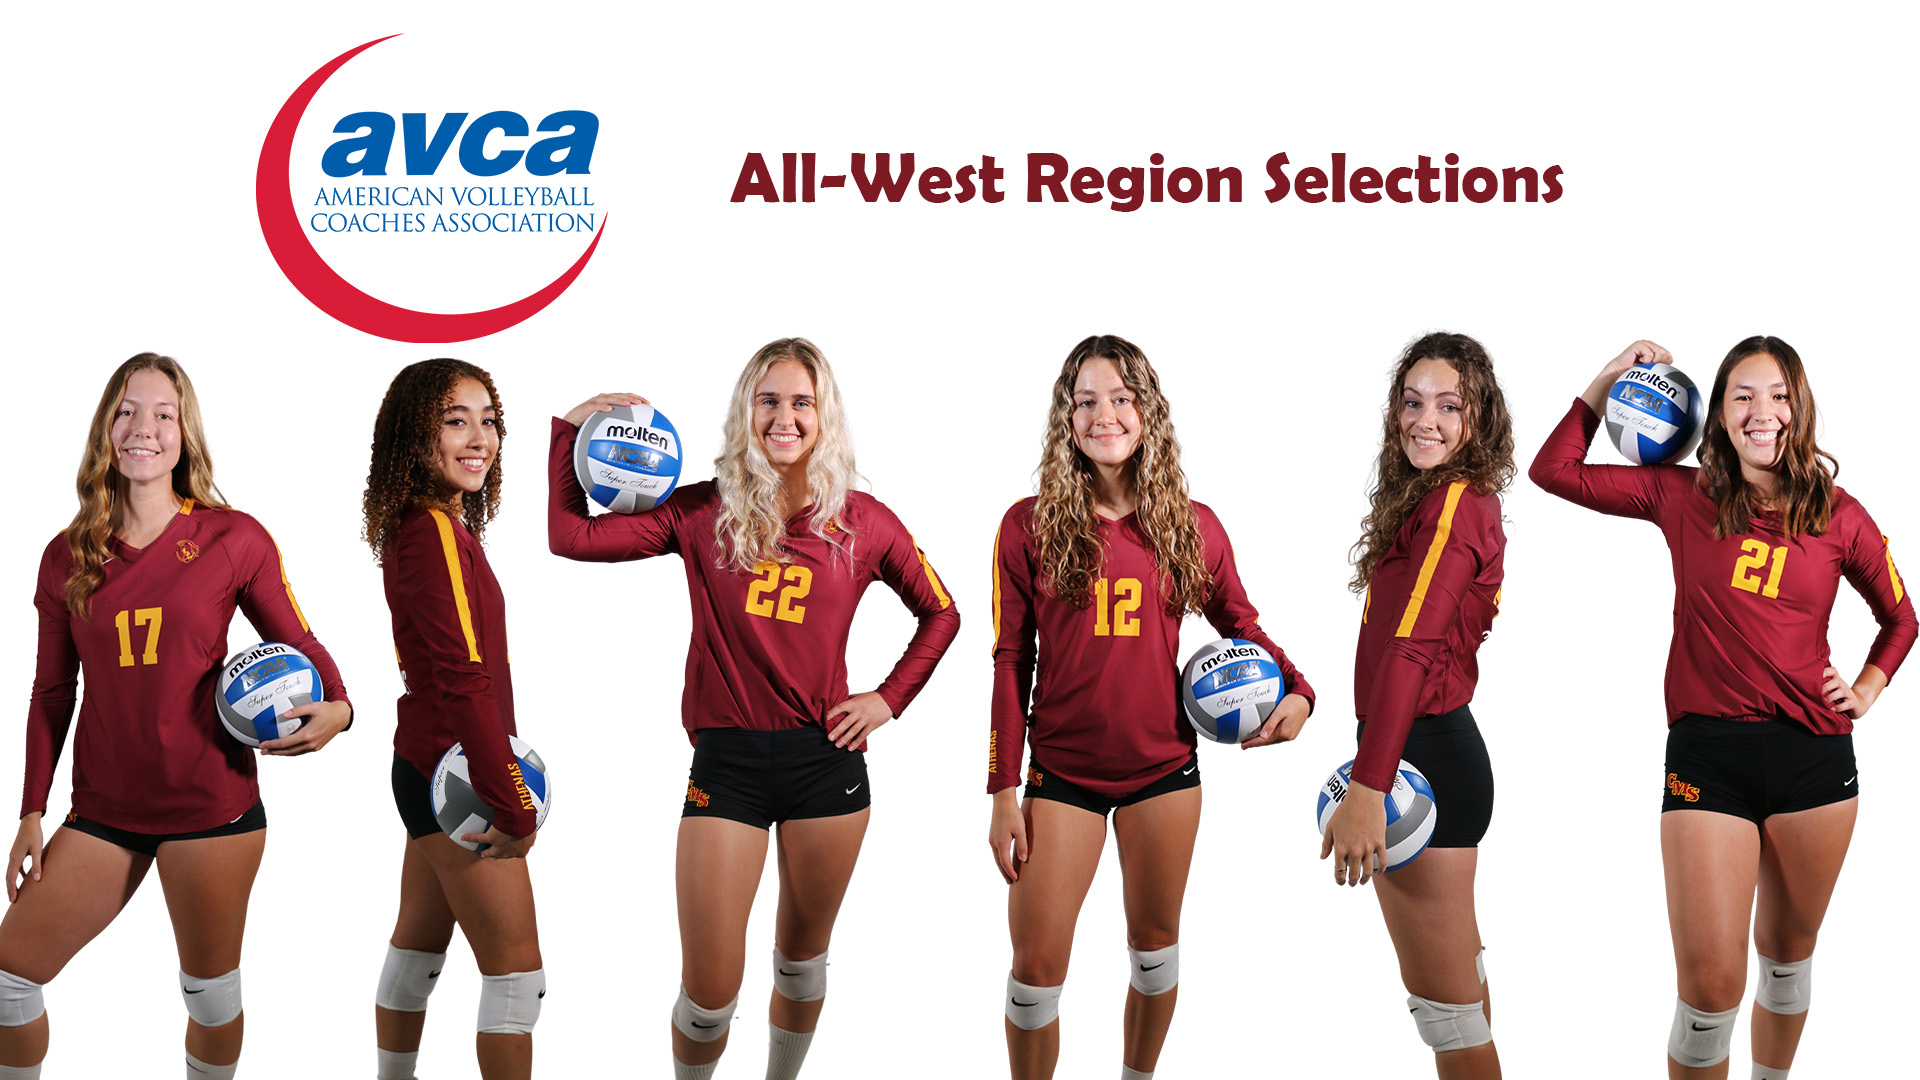 The six all-region selections posing with the AVCA logo